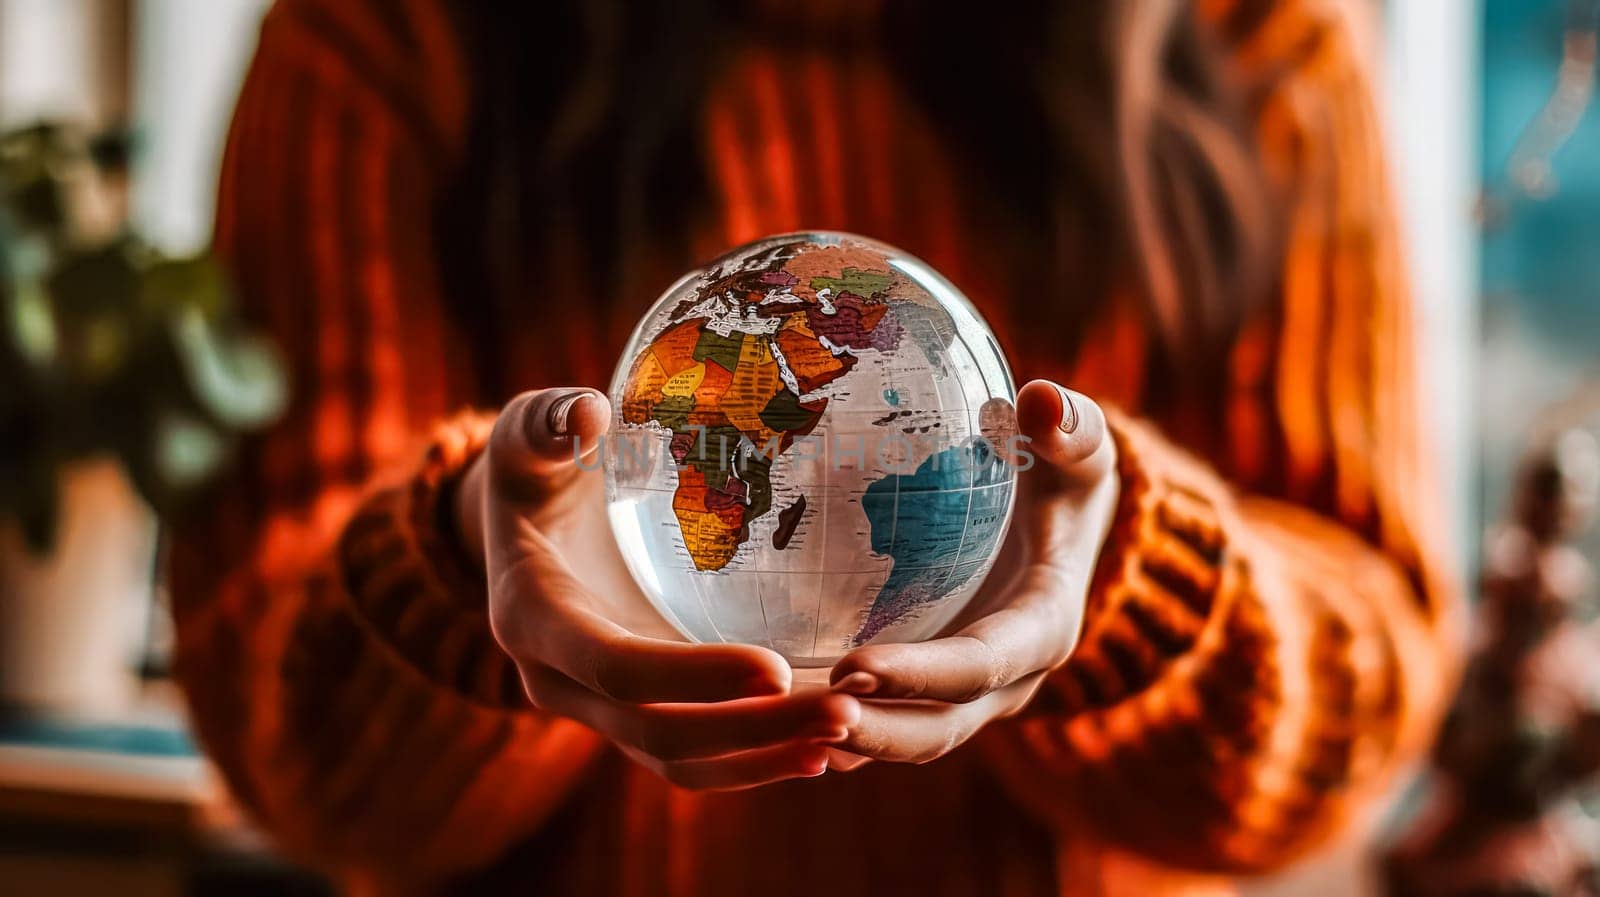 A young girl delicately holds a glass globe in her hands, symbolizing care, responsibility, and environmental consciousness.